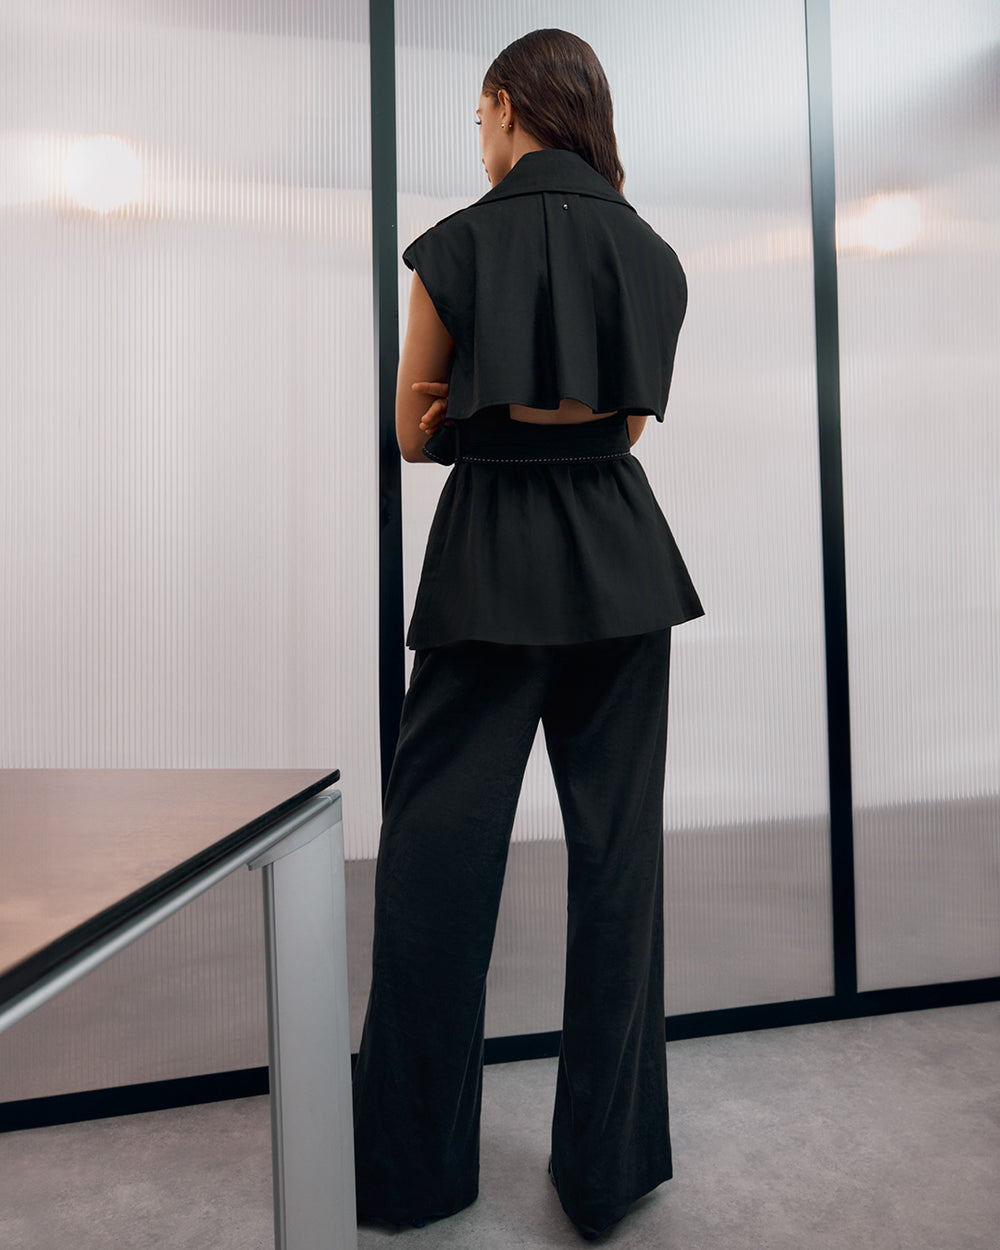 Woman standing with her back to the camera in an indoor setting.